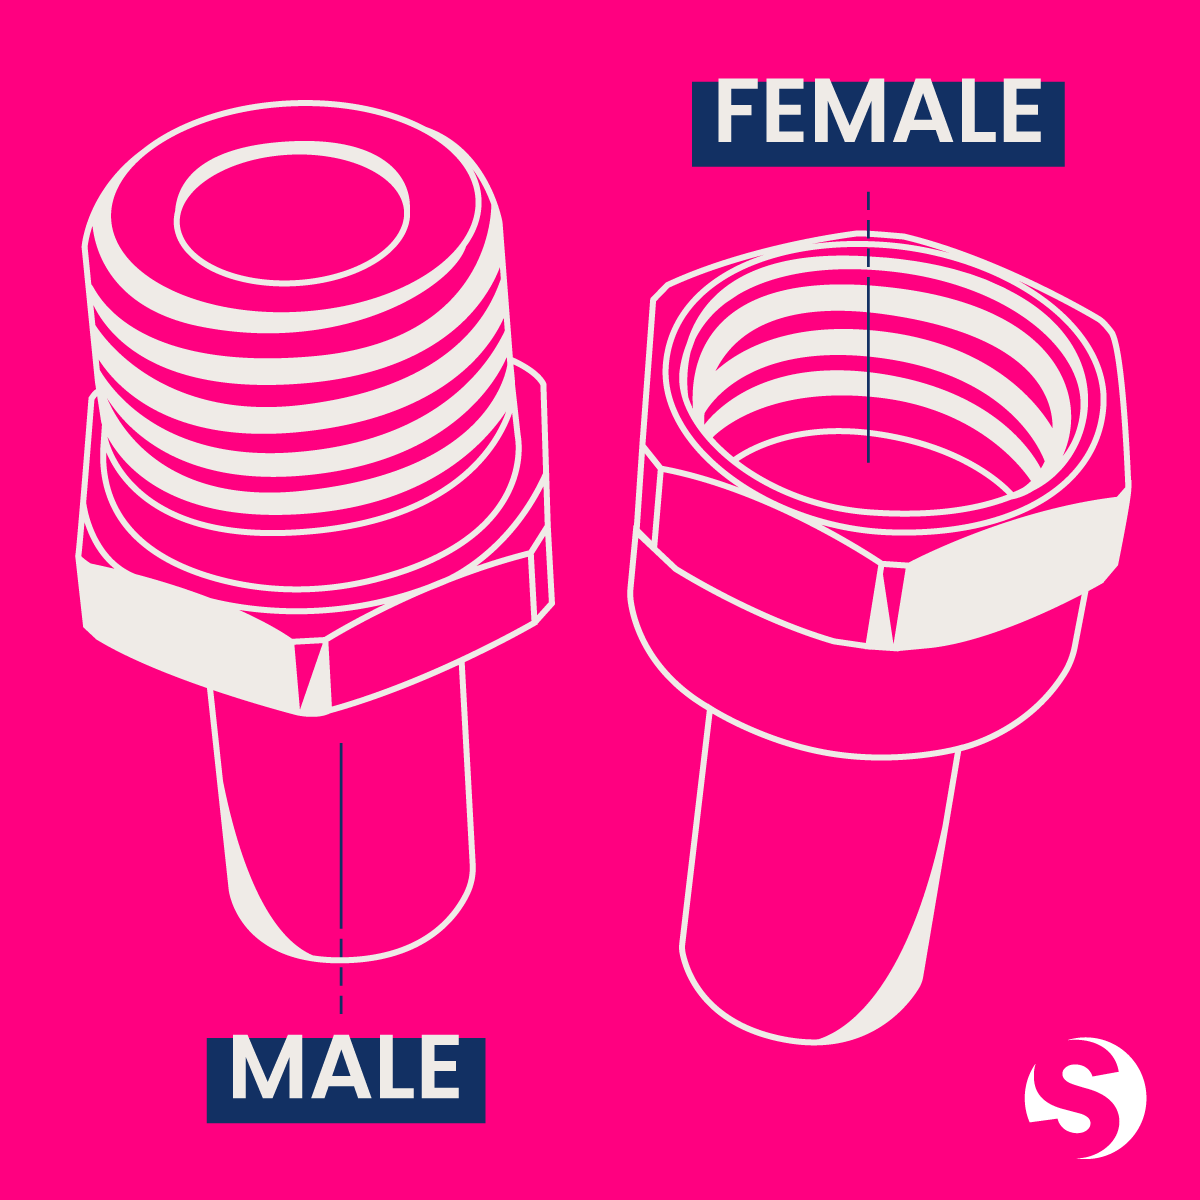 Male and female threads